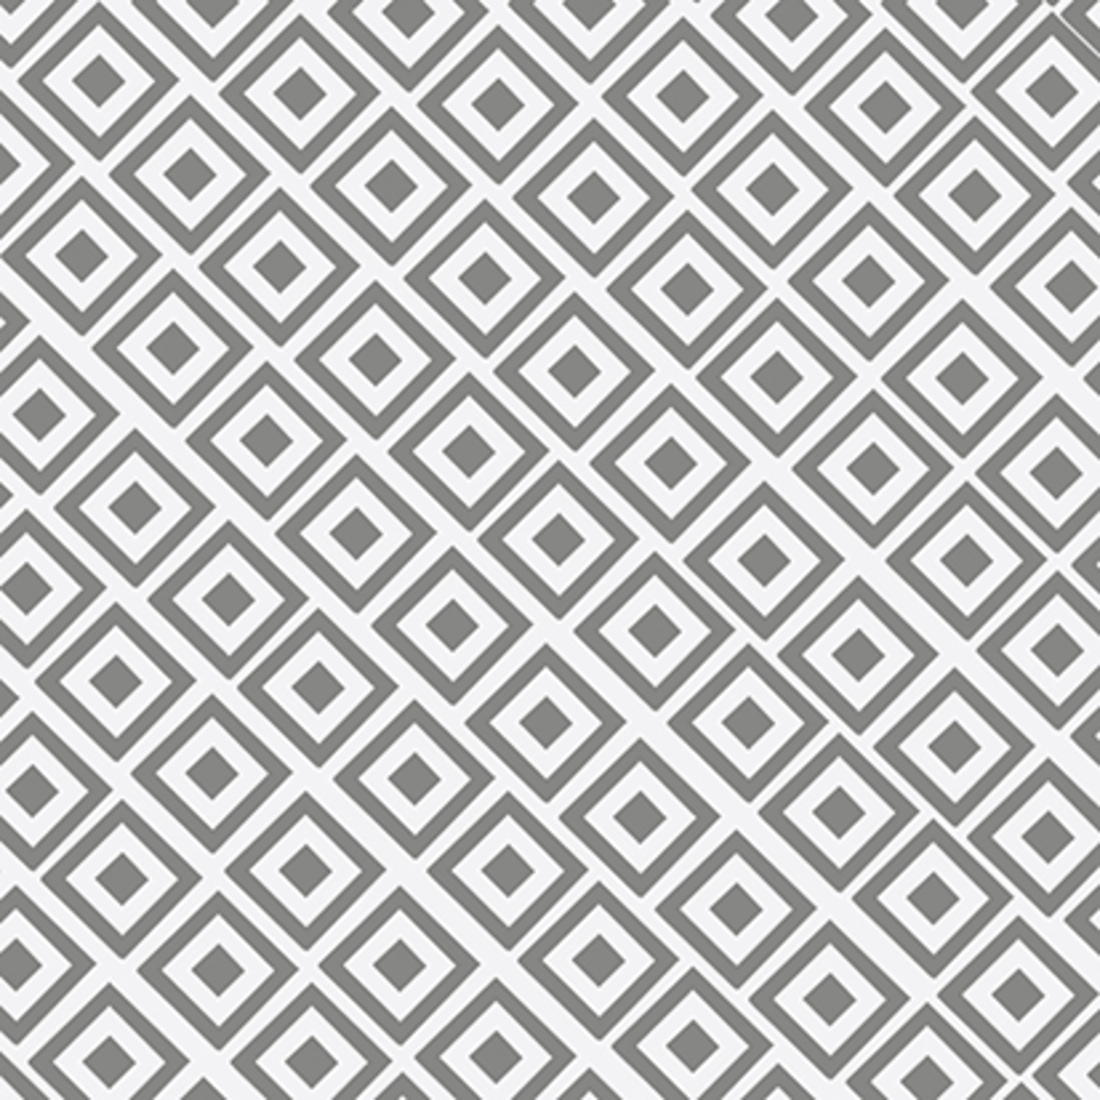 SEAMLESS PATTERNS TEXTURE & KIDS ROOM DECOR cover image.